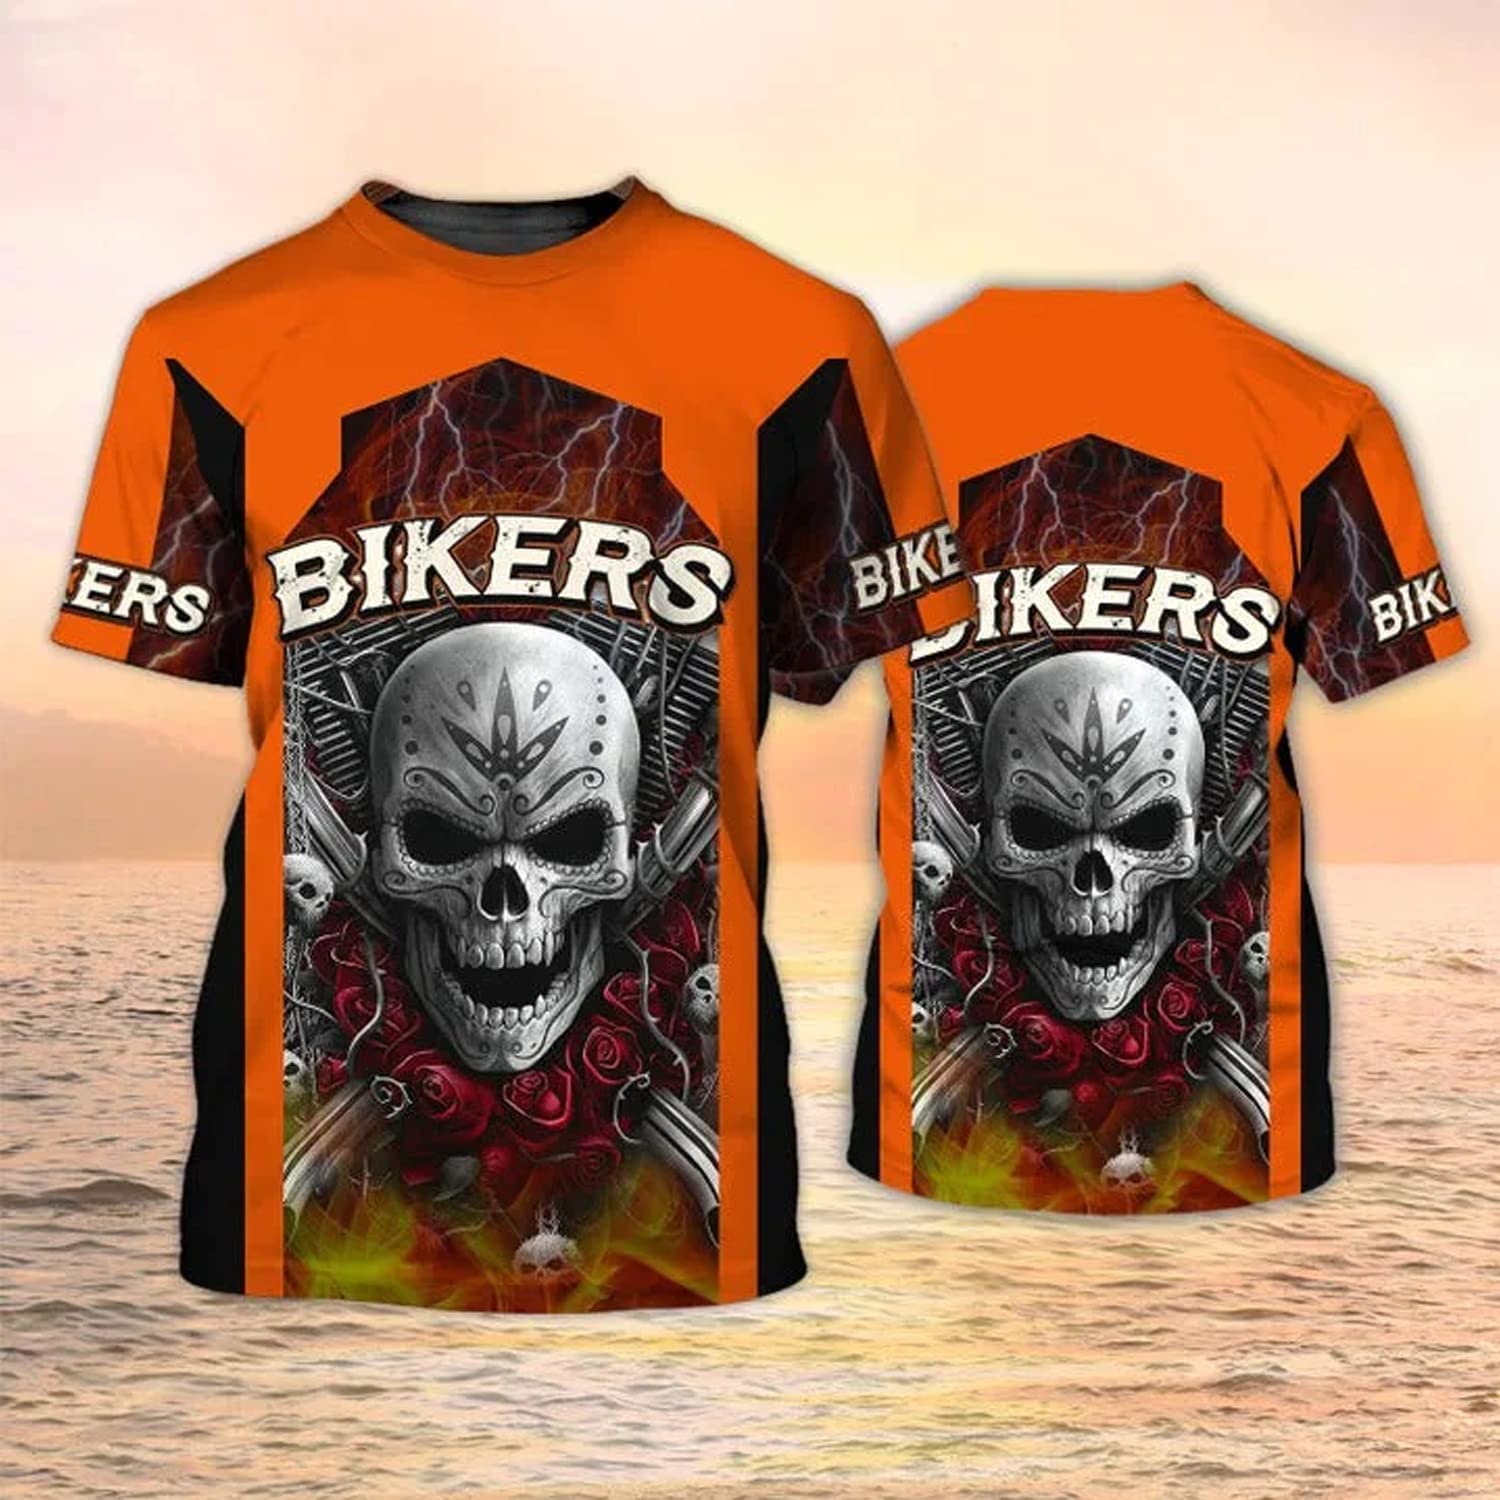 3D Printed Biker Shirt with Personalized Design: Perfect Gift for Biker Enthusiasts and Baseball Players – JOT1586